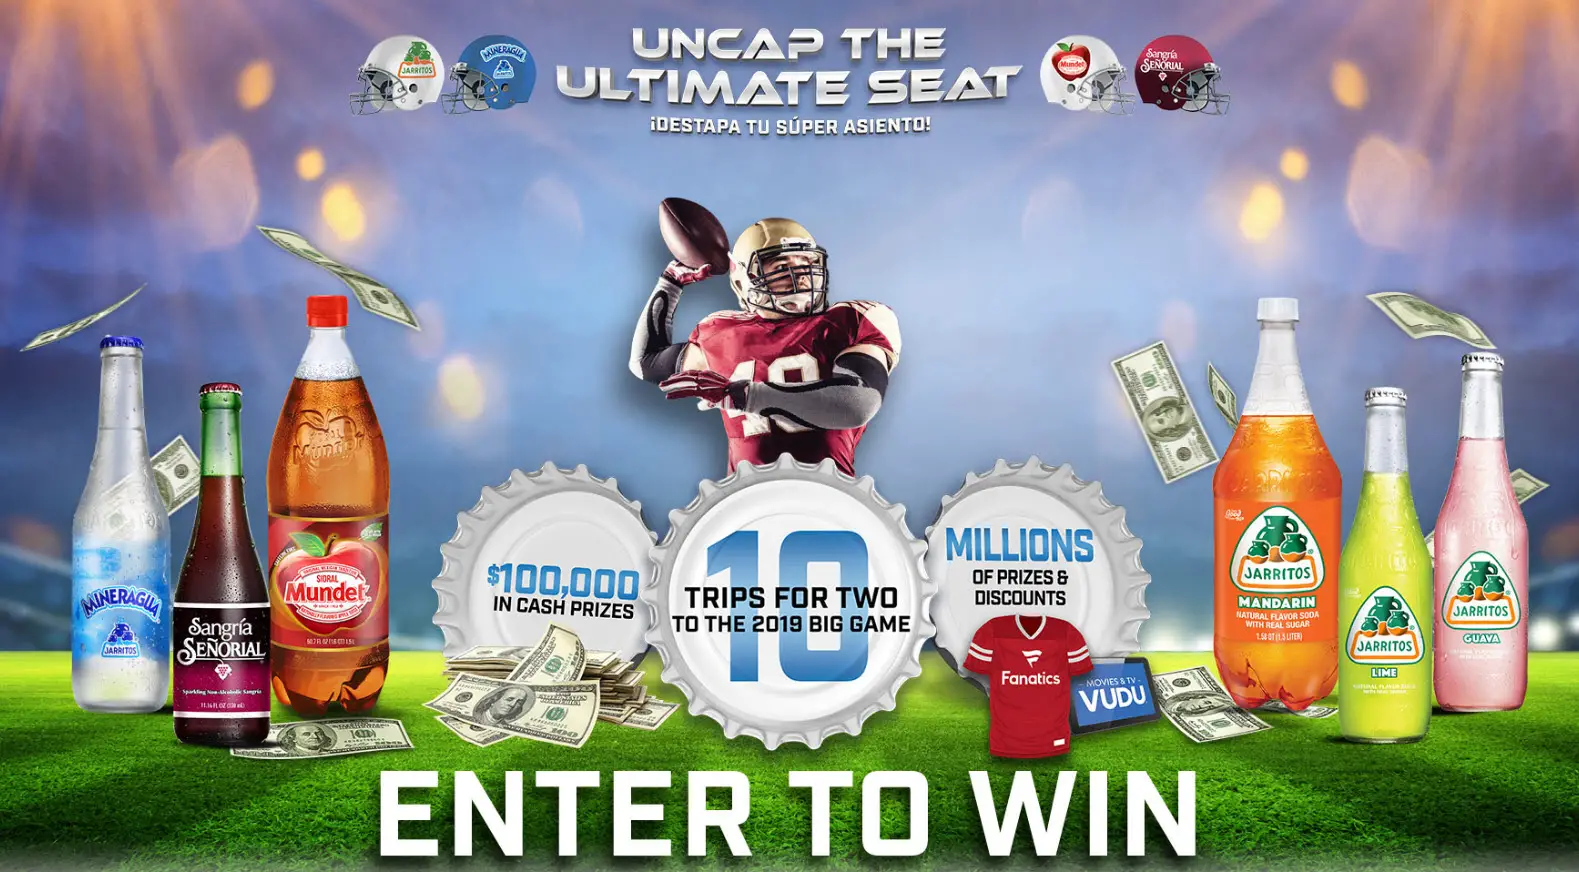 Play the Novamex Uncap The Ultimate Seat Instant Win Game for your chance to win one of ten trips for two to the 2019 Super Bowl game in Atlanta, GA or one of 2,250 prizes instantly!